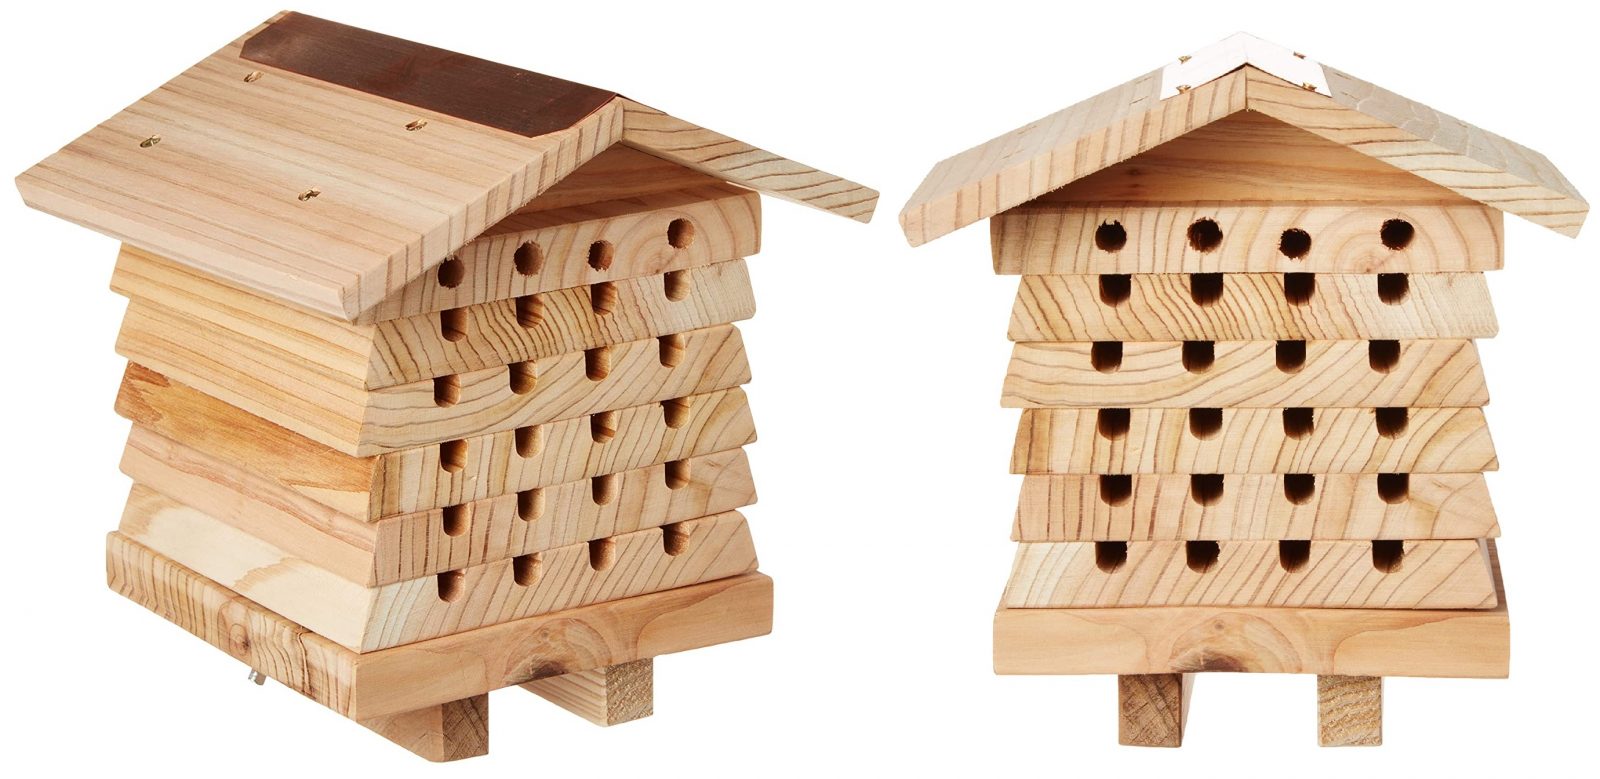 Amazon is selling a beehive that helps encourage bees to gardens in Summer, The Manc